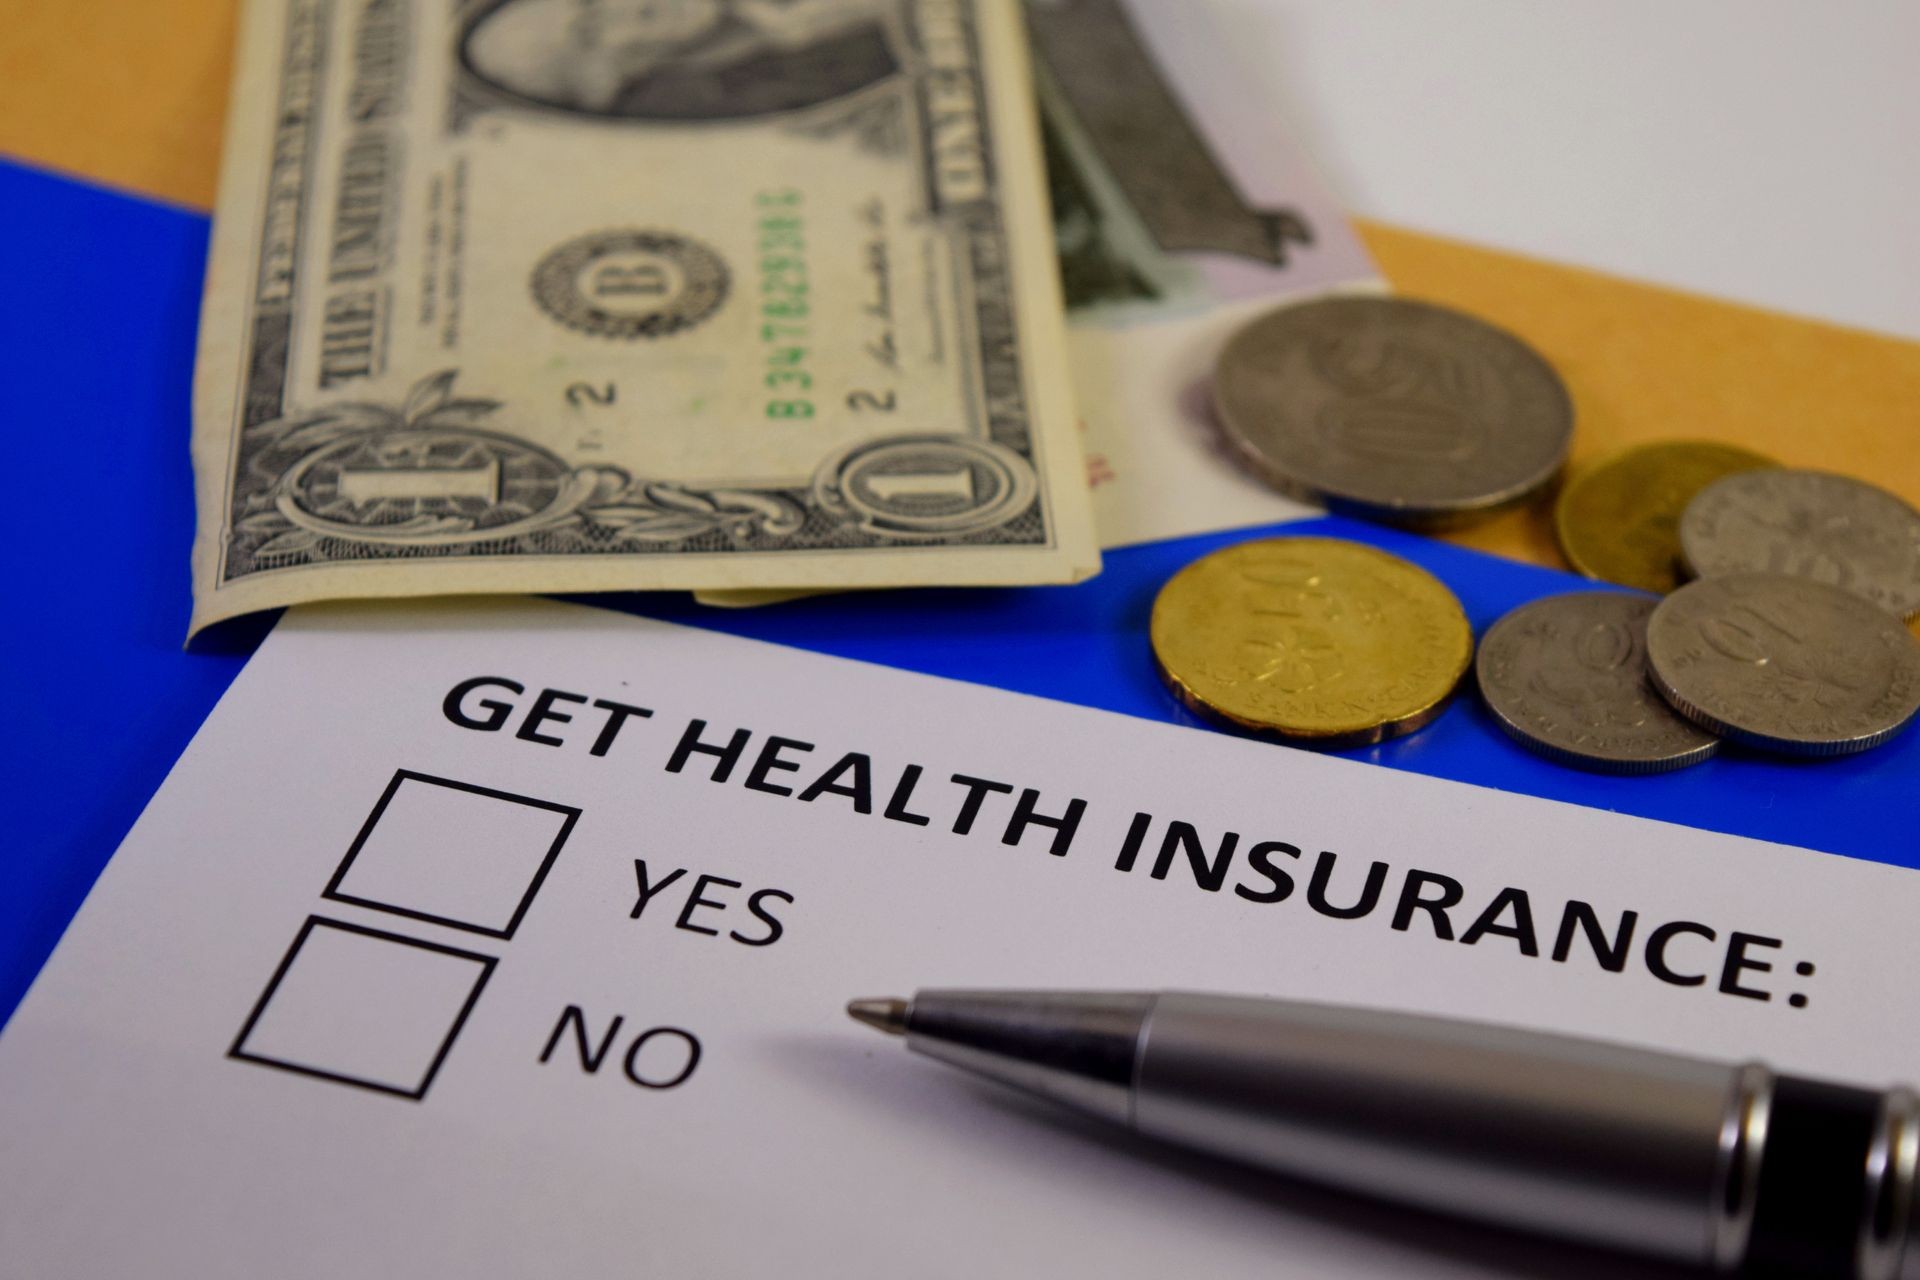 Health insurance - This is a photo consisting money and a form of getting health insurance. This is suitable for advertisement promoting health insurance.